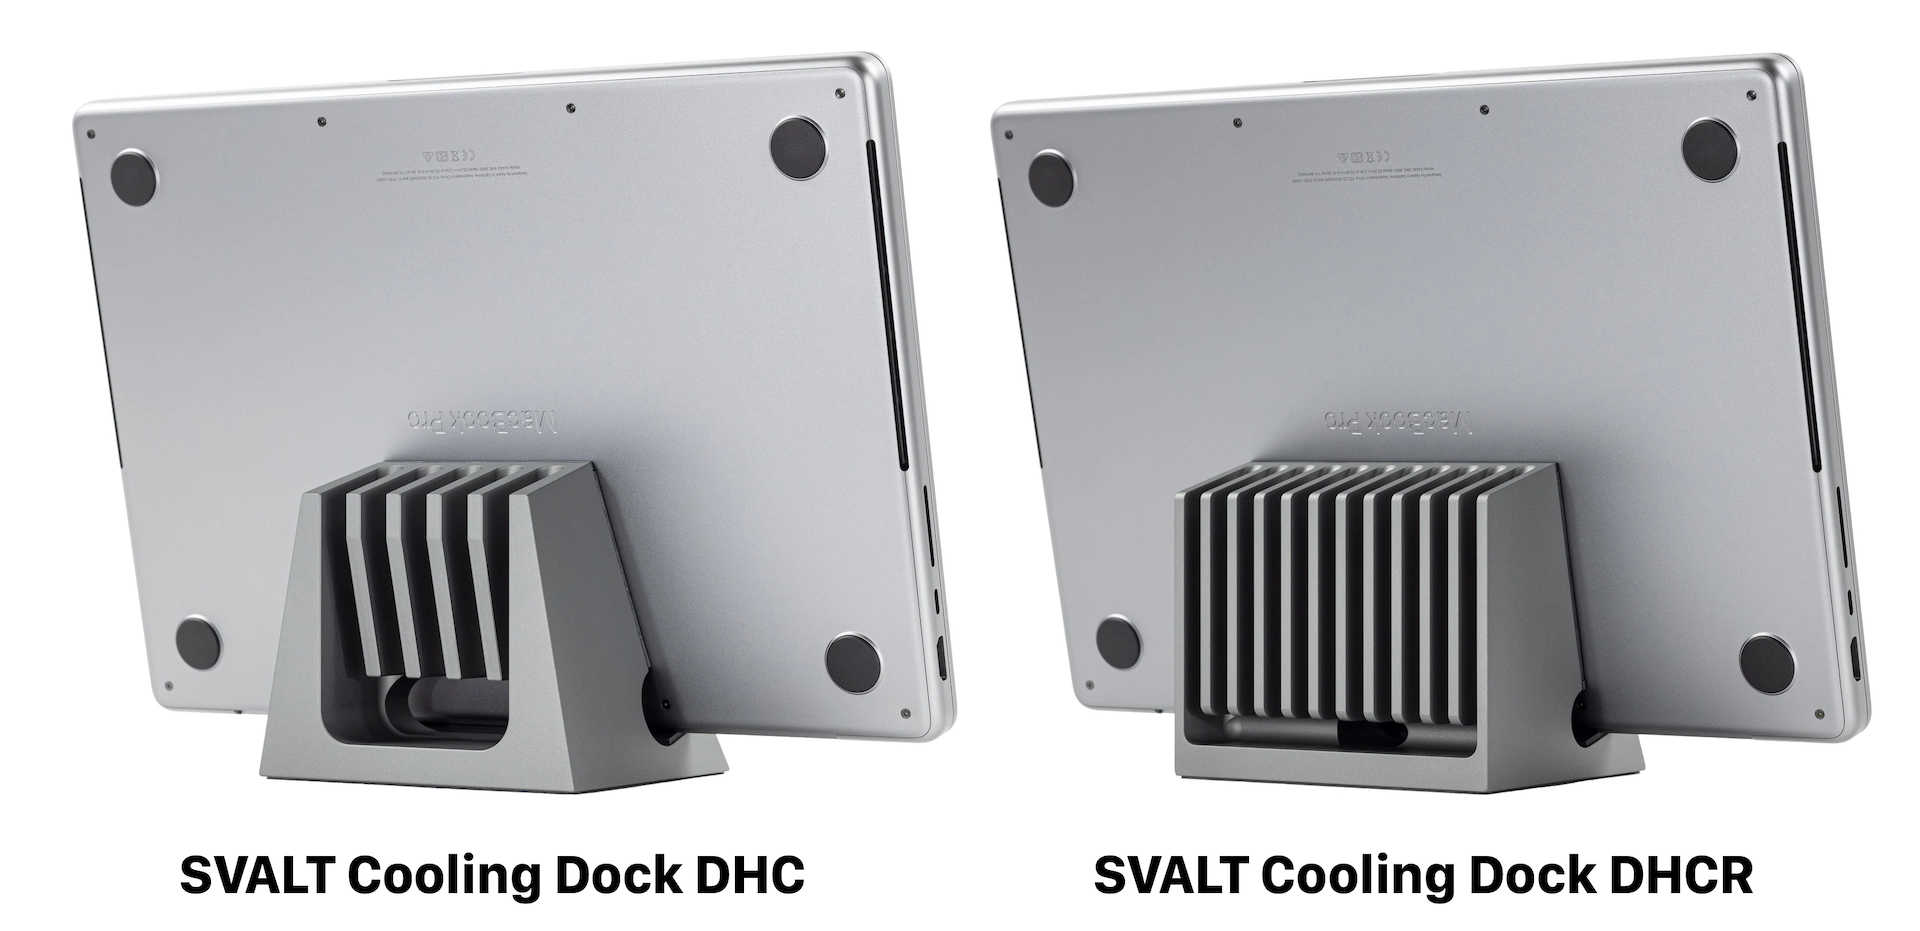 Cooling Dock DHC and DHCR